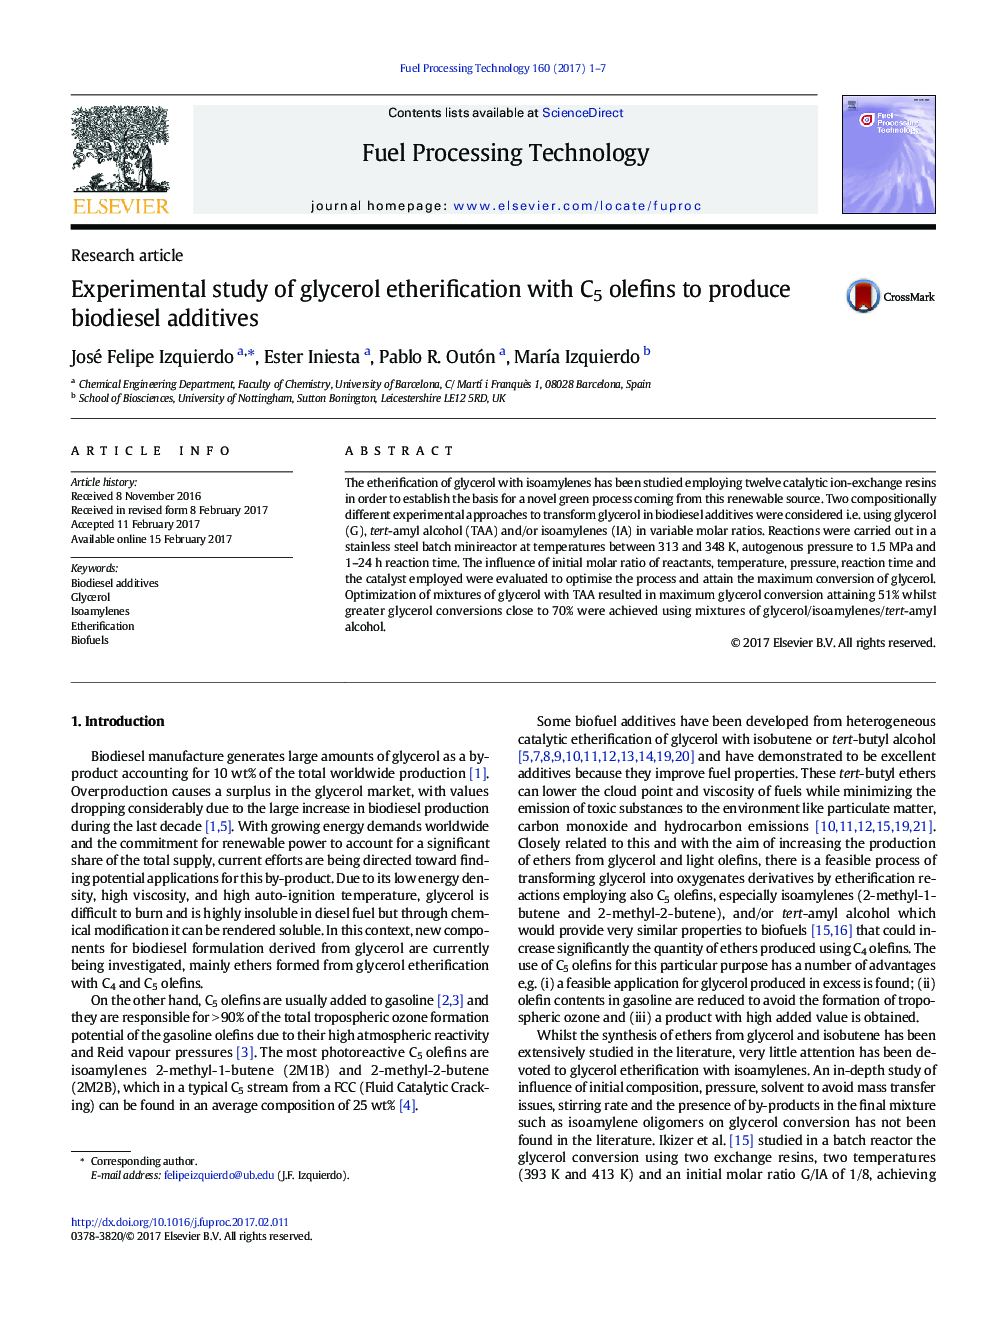 Experimental study of glycerol etherification with C5 olefins to produce biodiesel additives